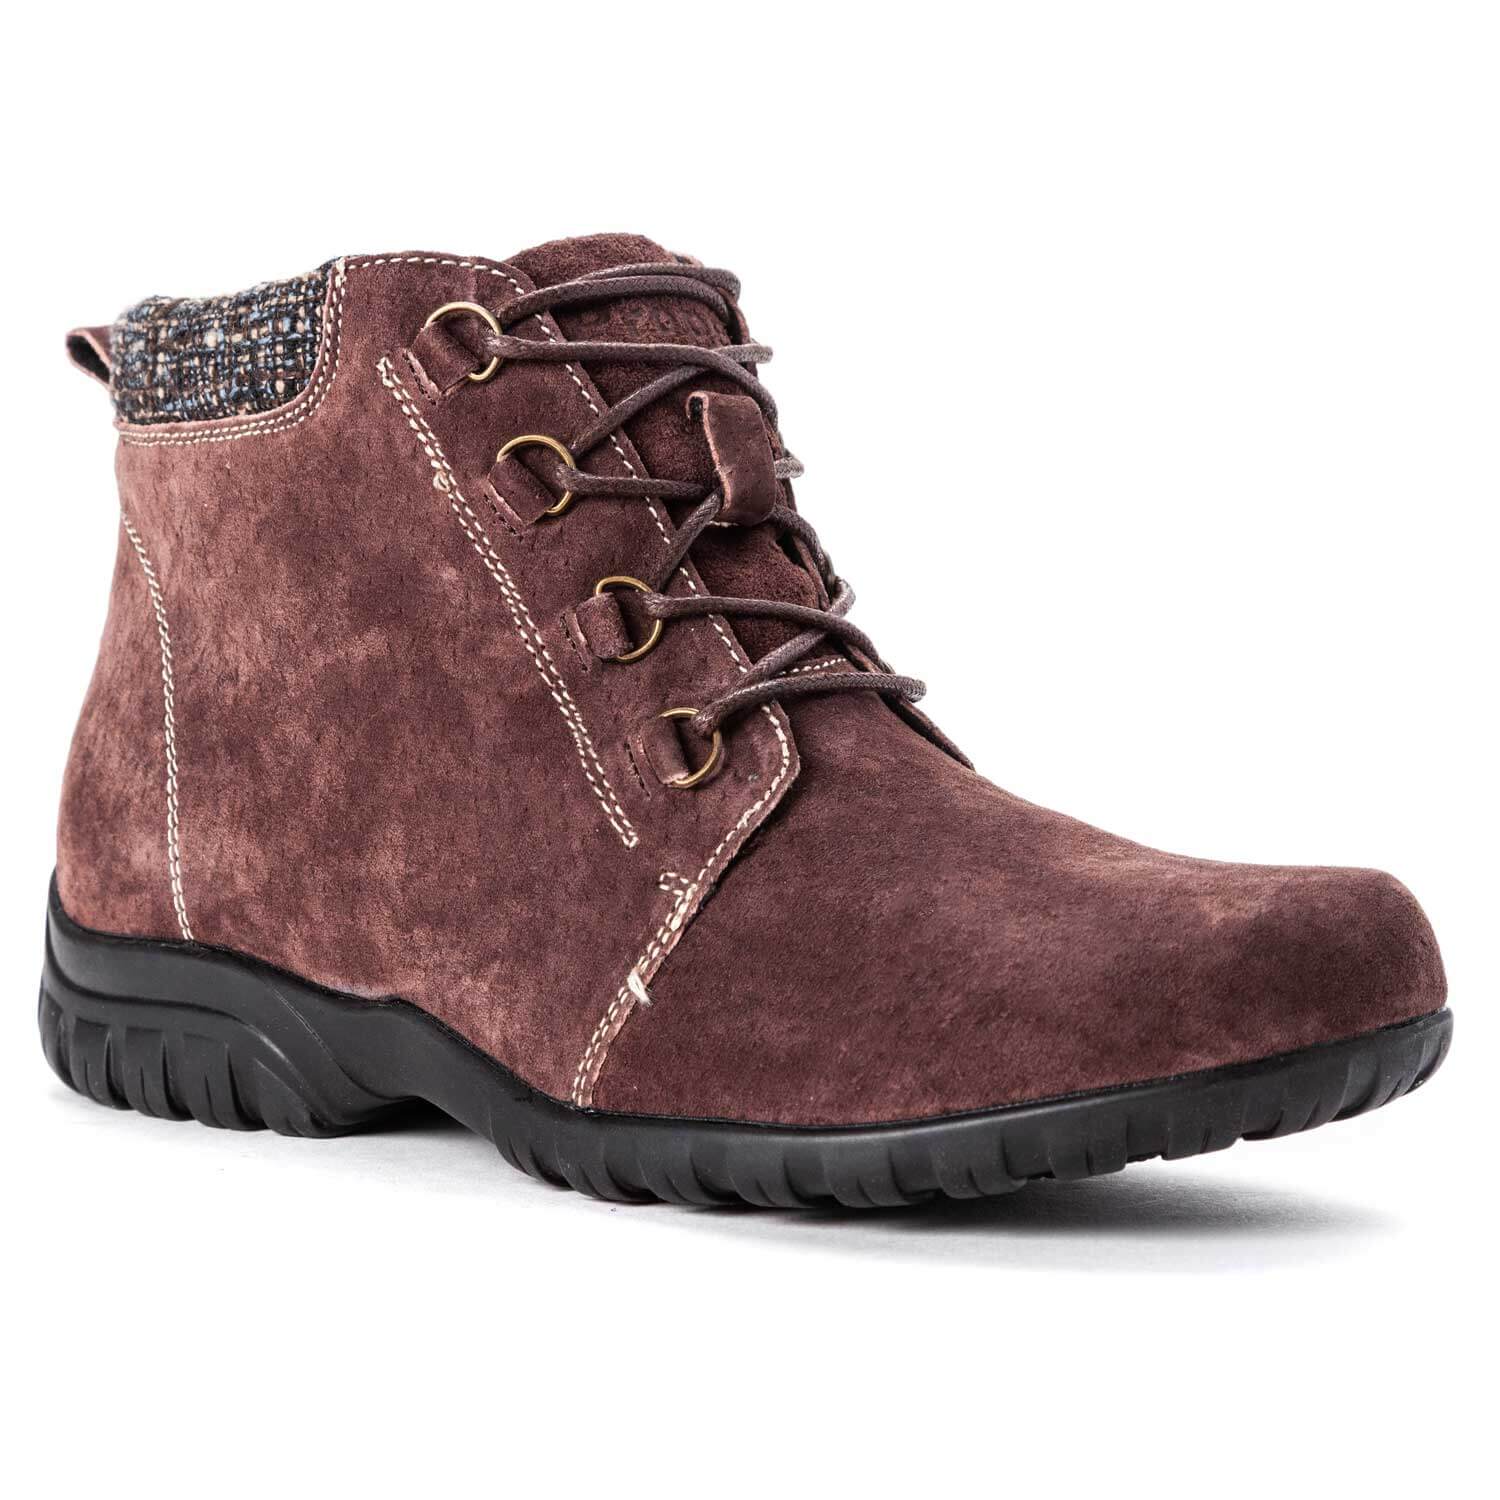 Propet Delaney Suede WFV002S Women's 5 Casual Boot - Extra Depth